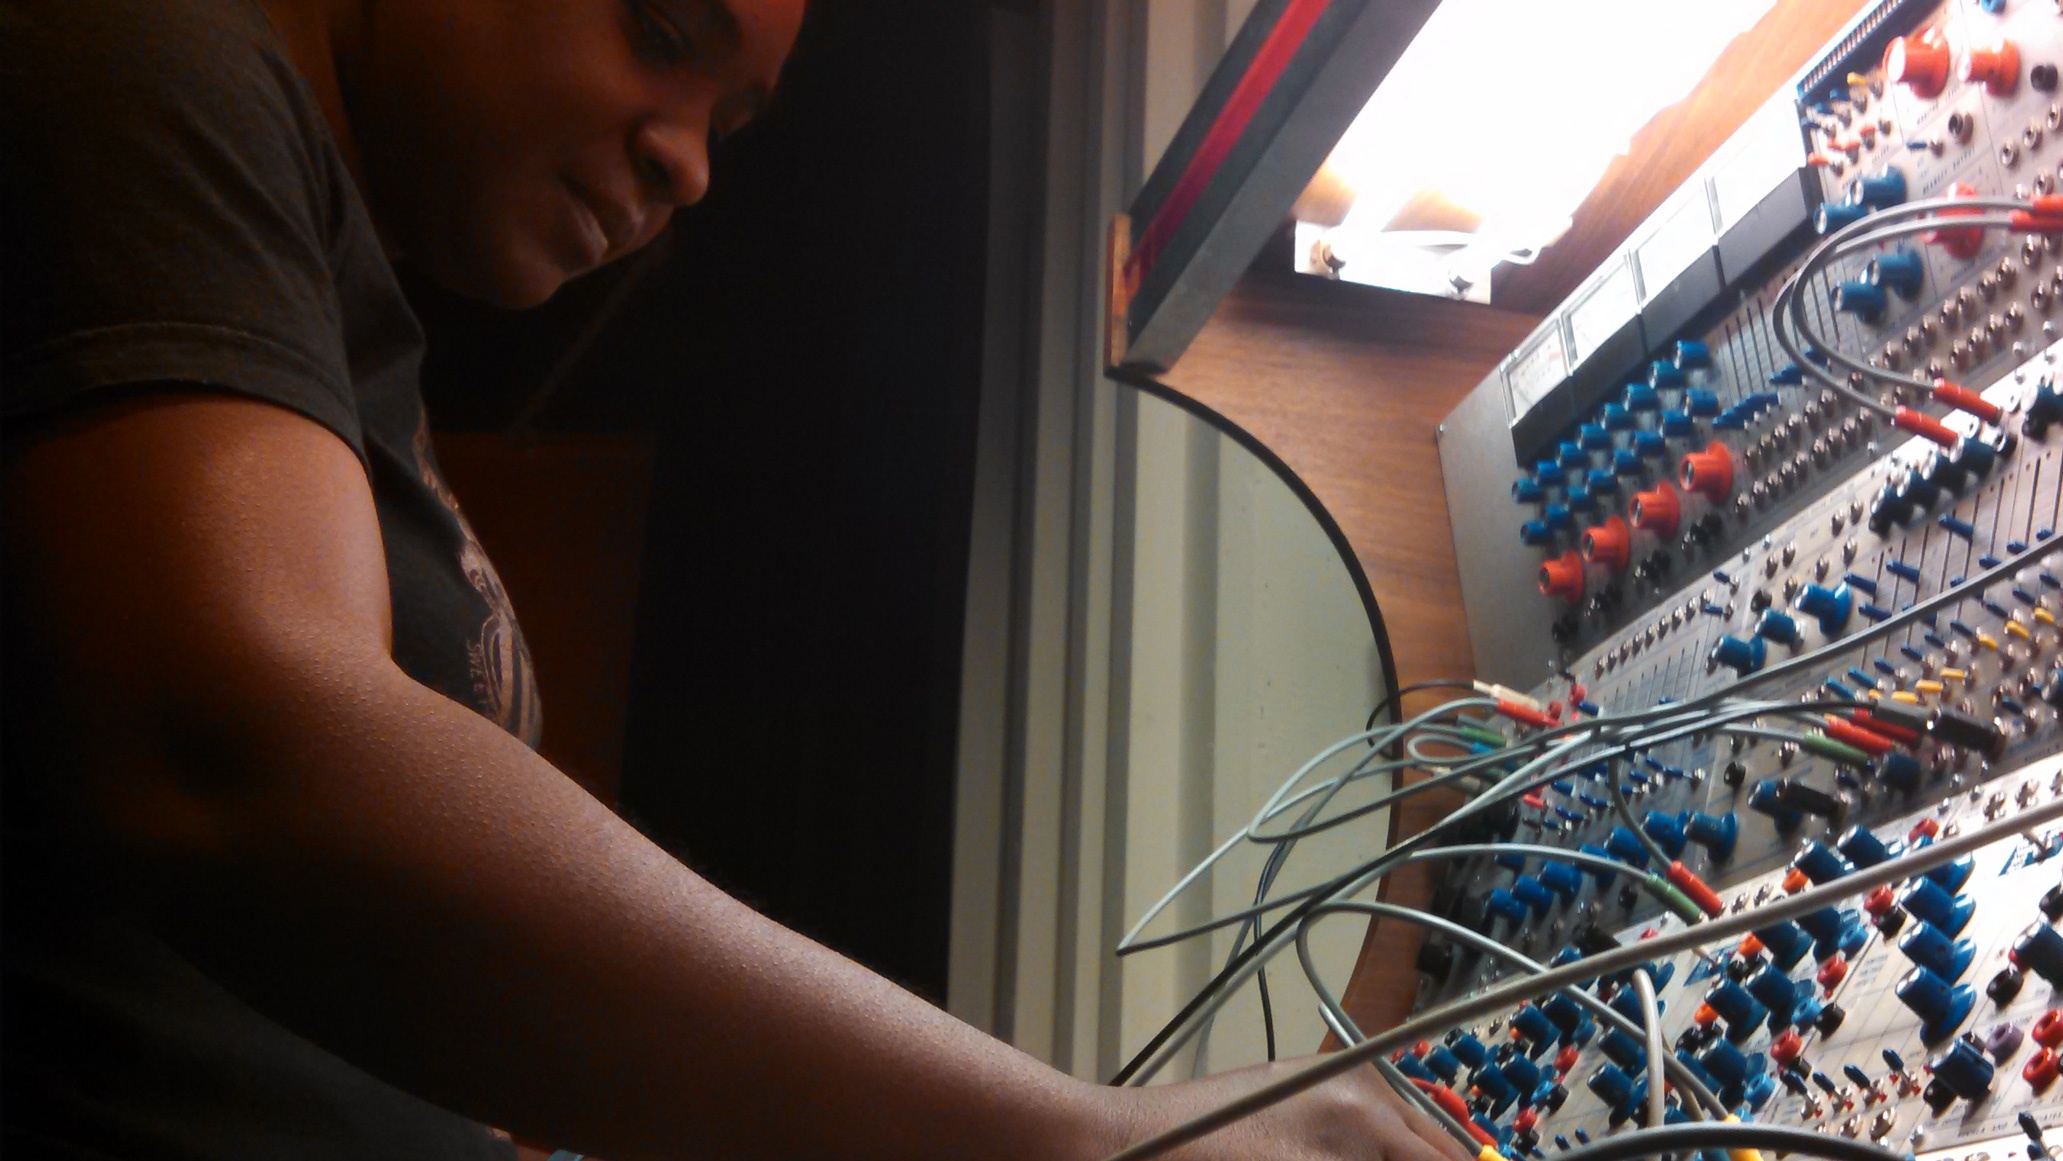 Artist Yvette Janine Jackson stands in front of a sound board with many wires and knobs.